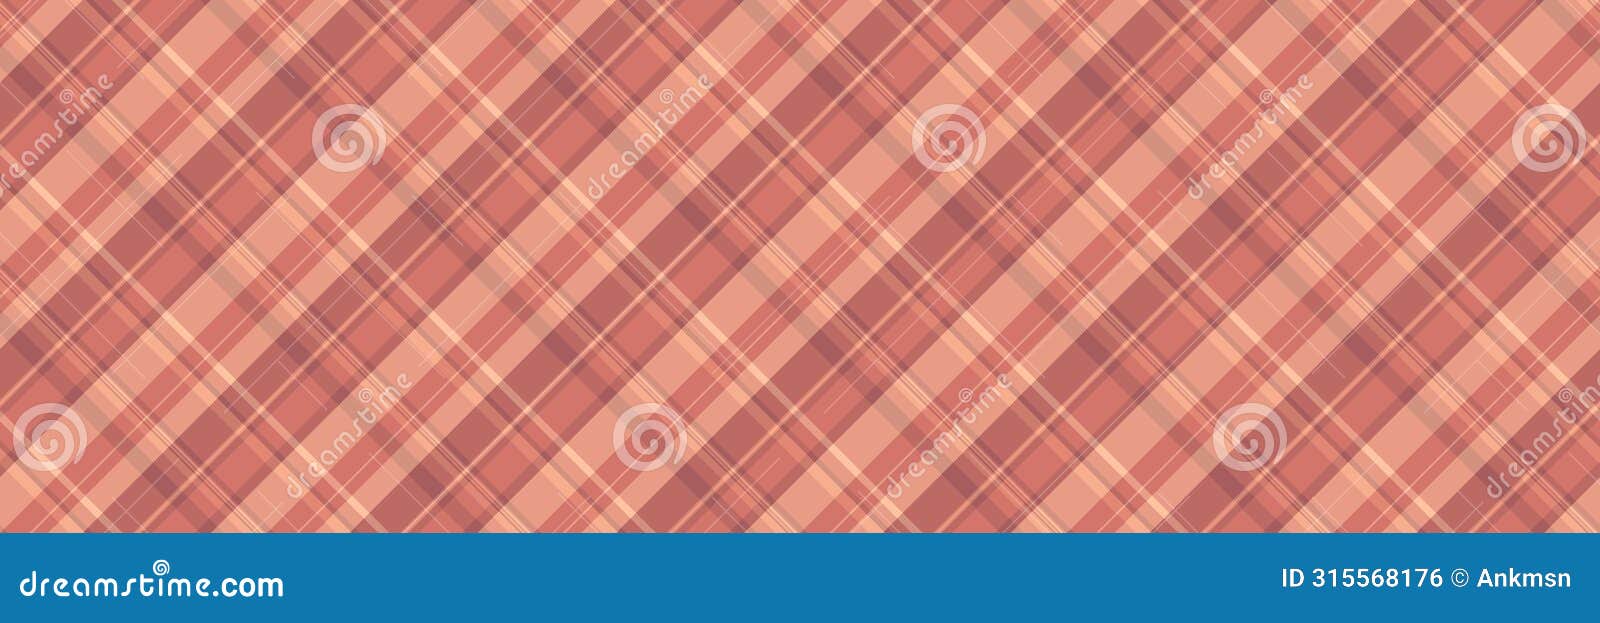 yuletide fabric textile pattern, vintage texture seamless check. harmony  tartan plaid background in red and orange colors